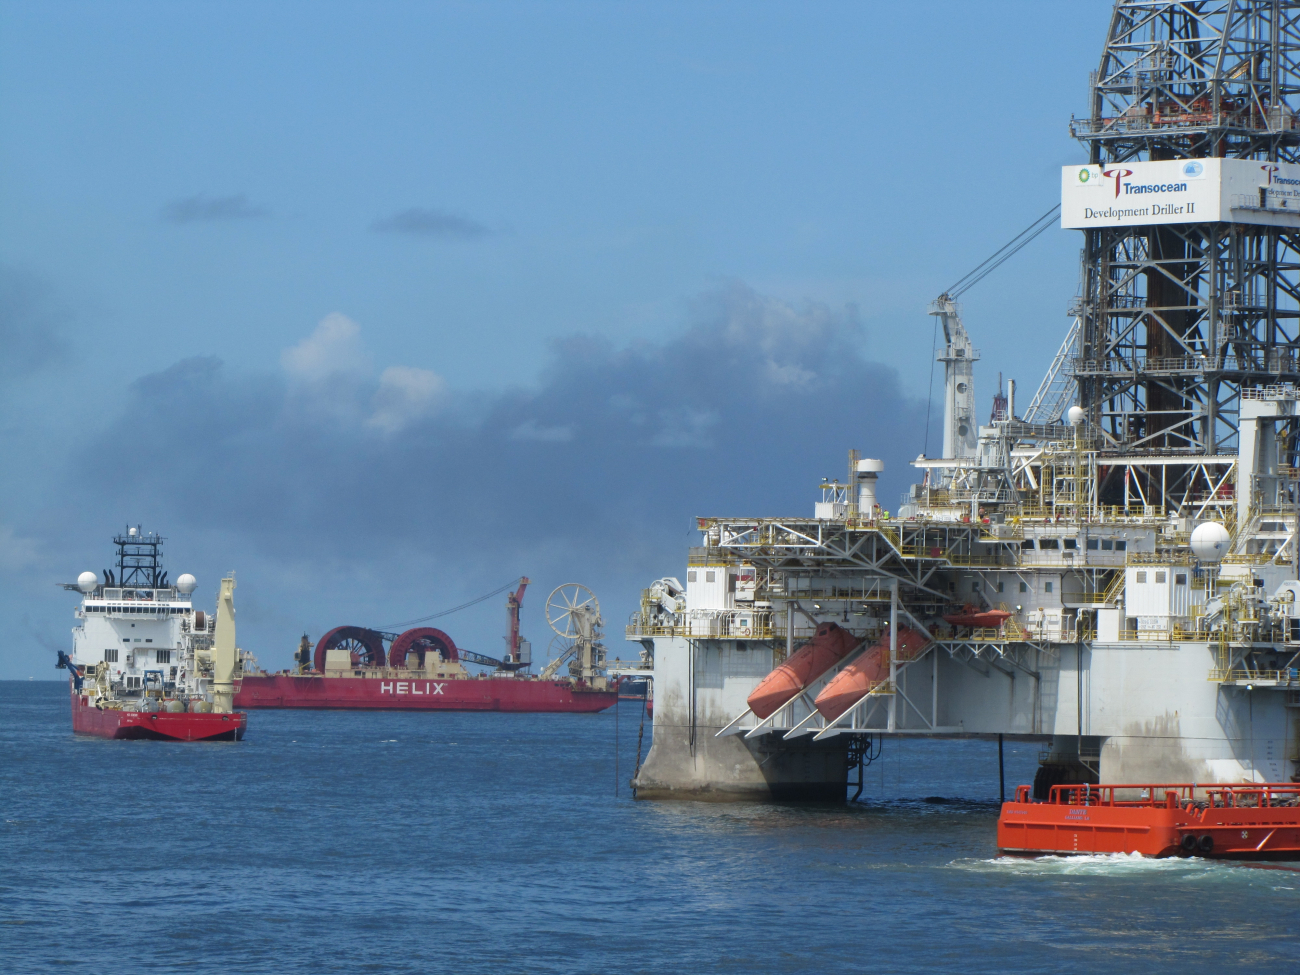 Vessels and drilling rigs at Deepwater Horizon disaster site